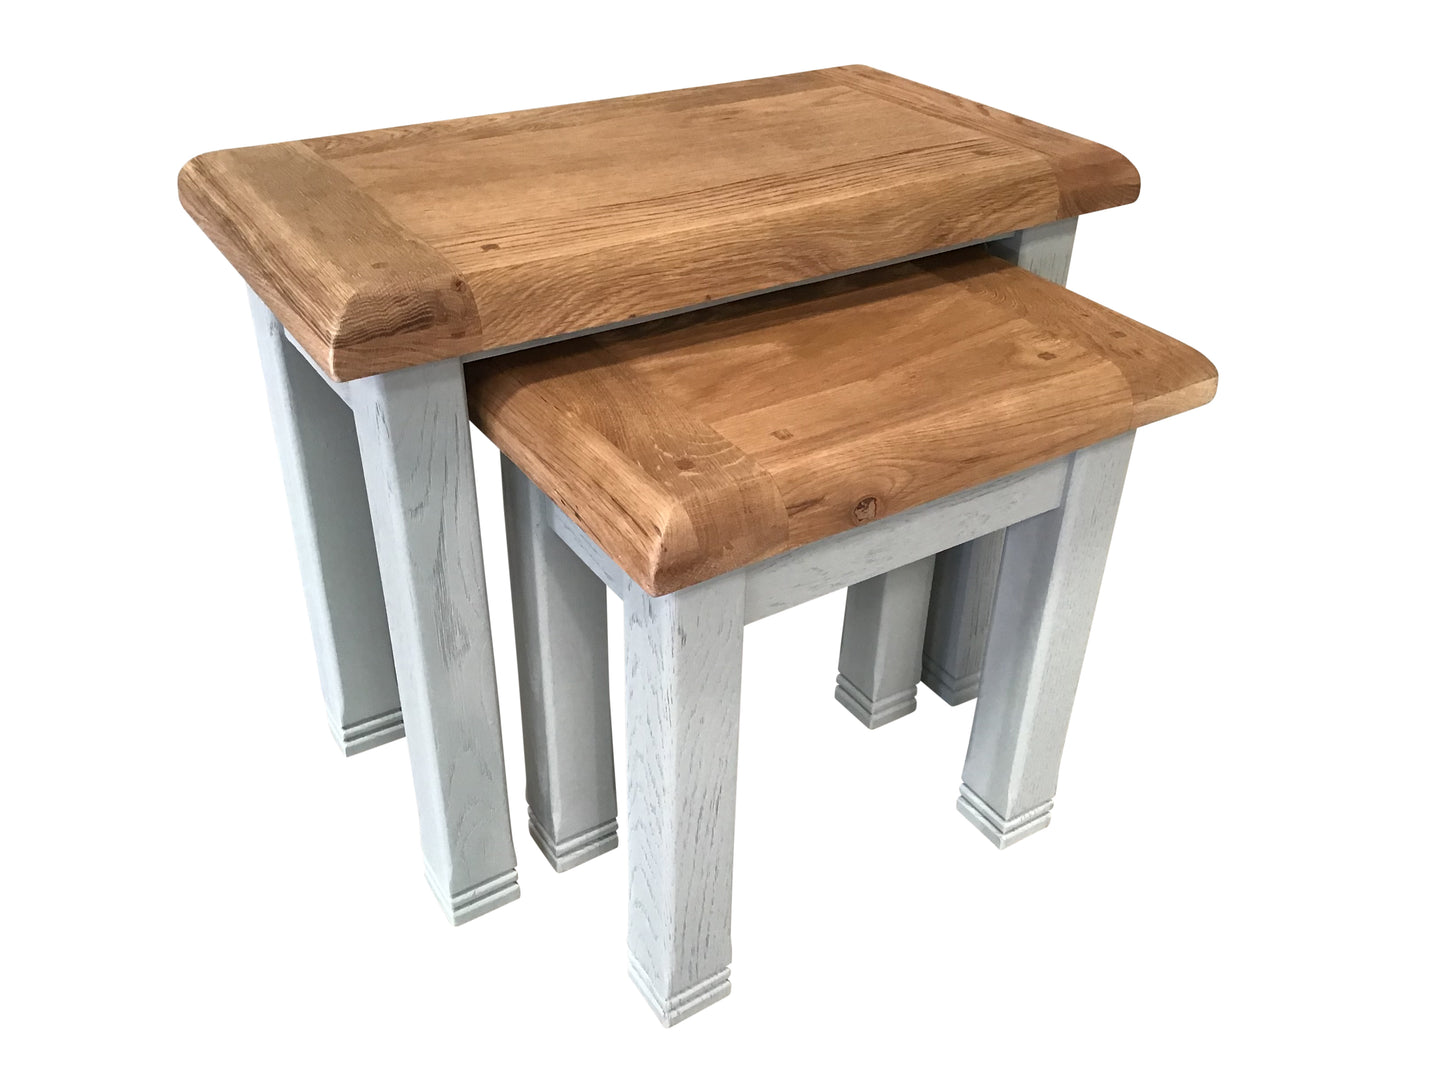 Danube Oak Nest of Tables painted French Grey